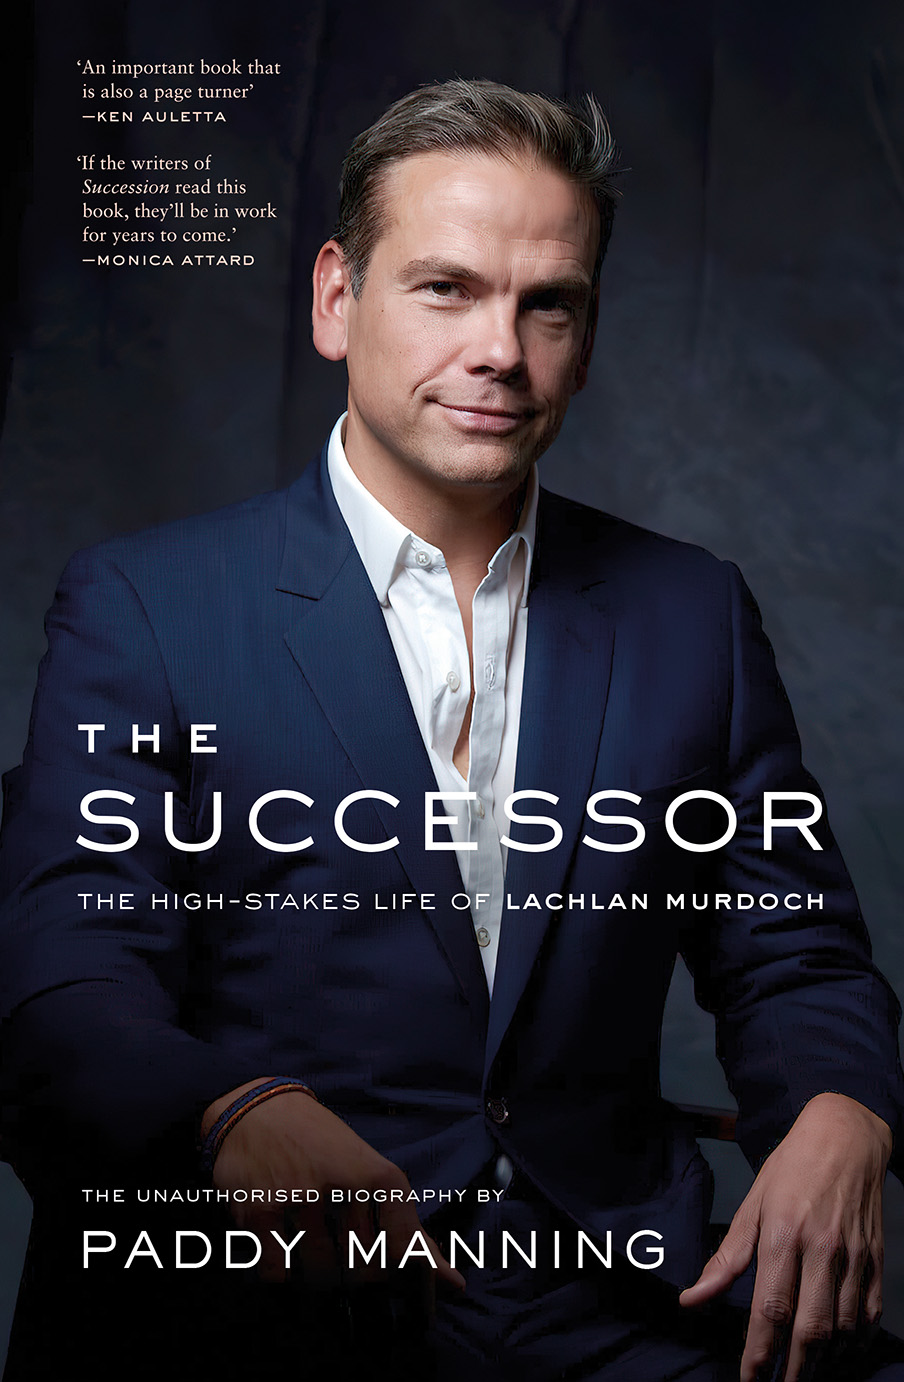 Paddy Manning - The Son Also Rises: Lachlan Murdoch